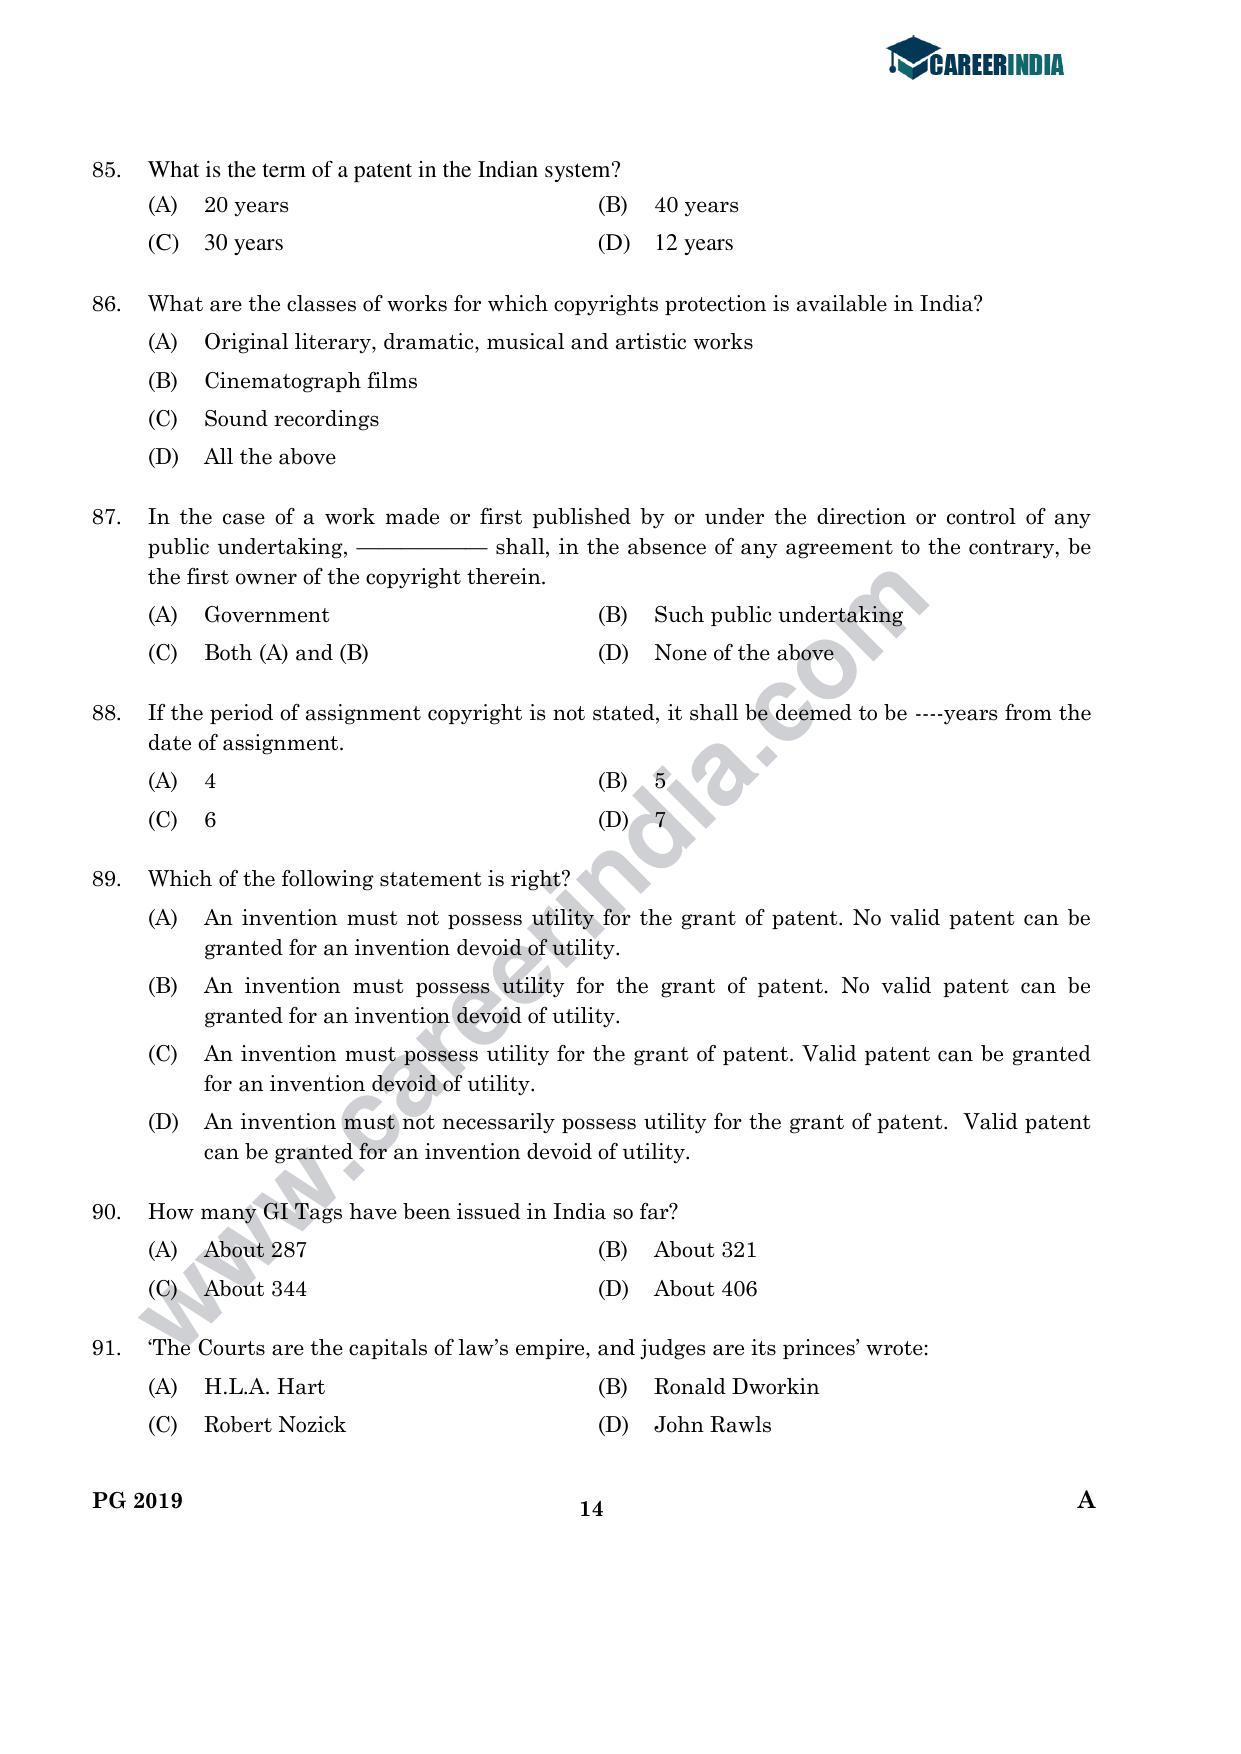 CLAT 2019 PG A-Series Question Papers (C.L.A.) - Page 13